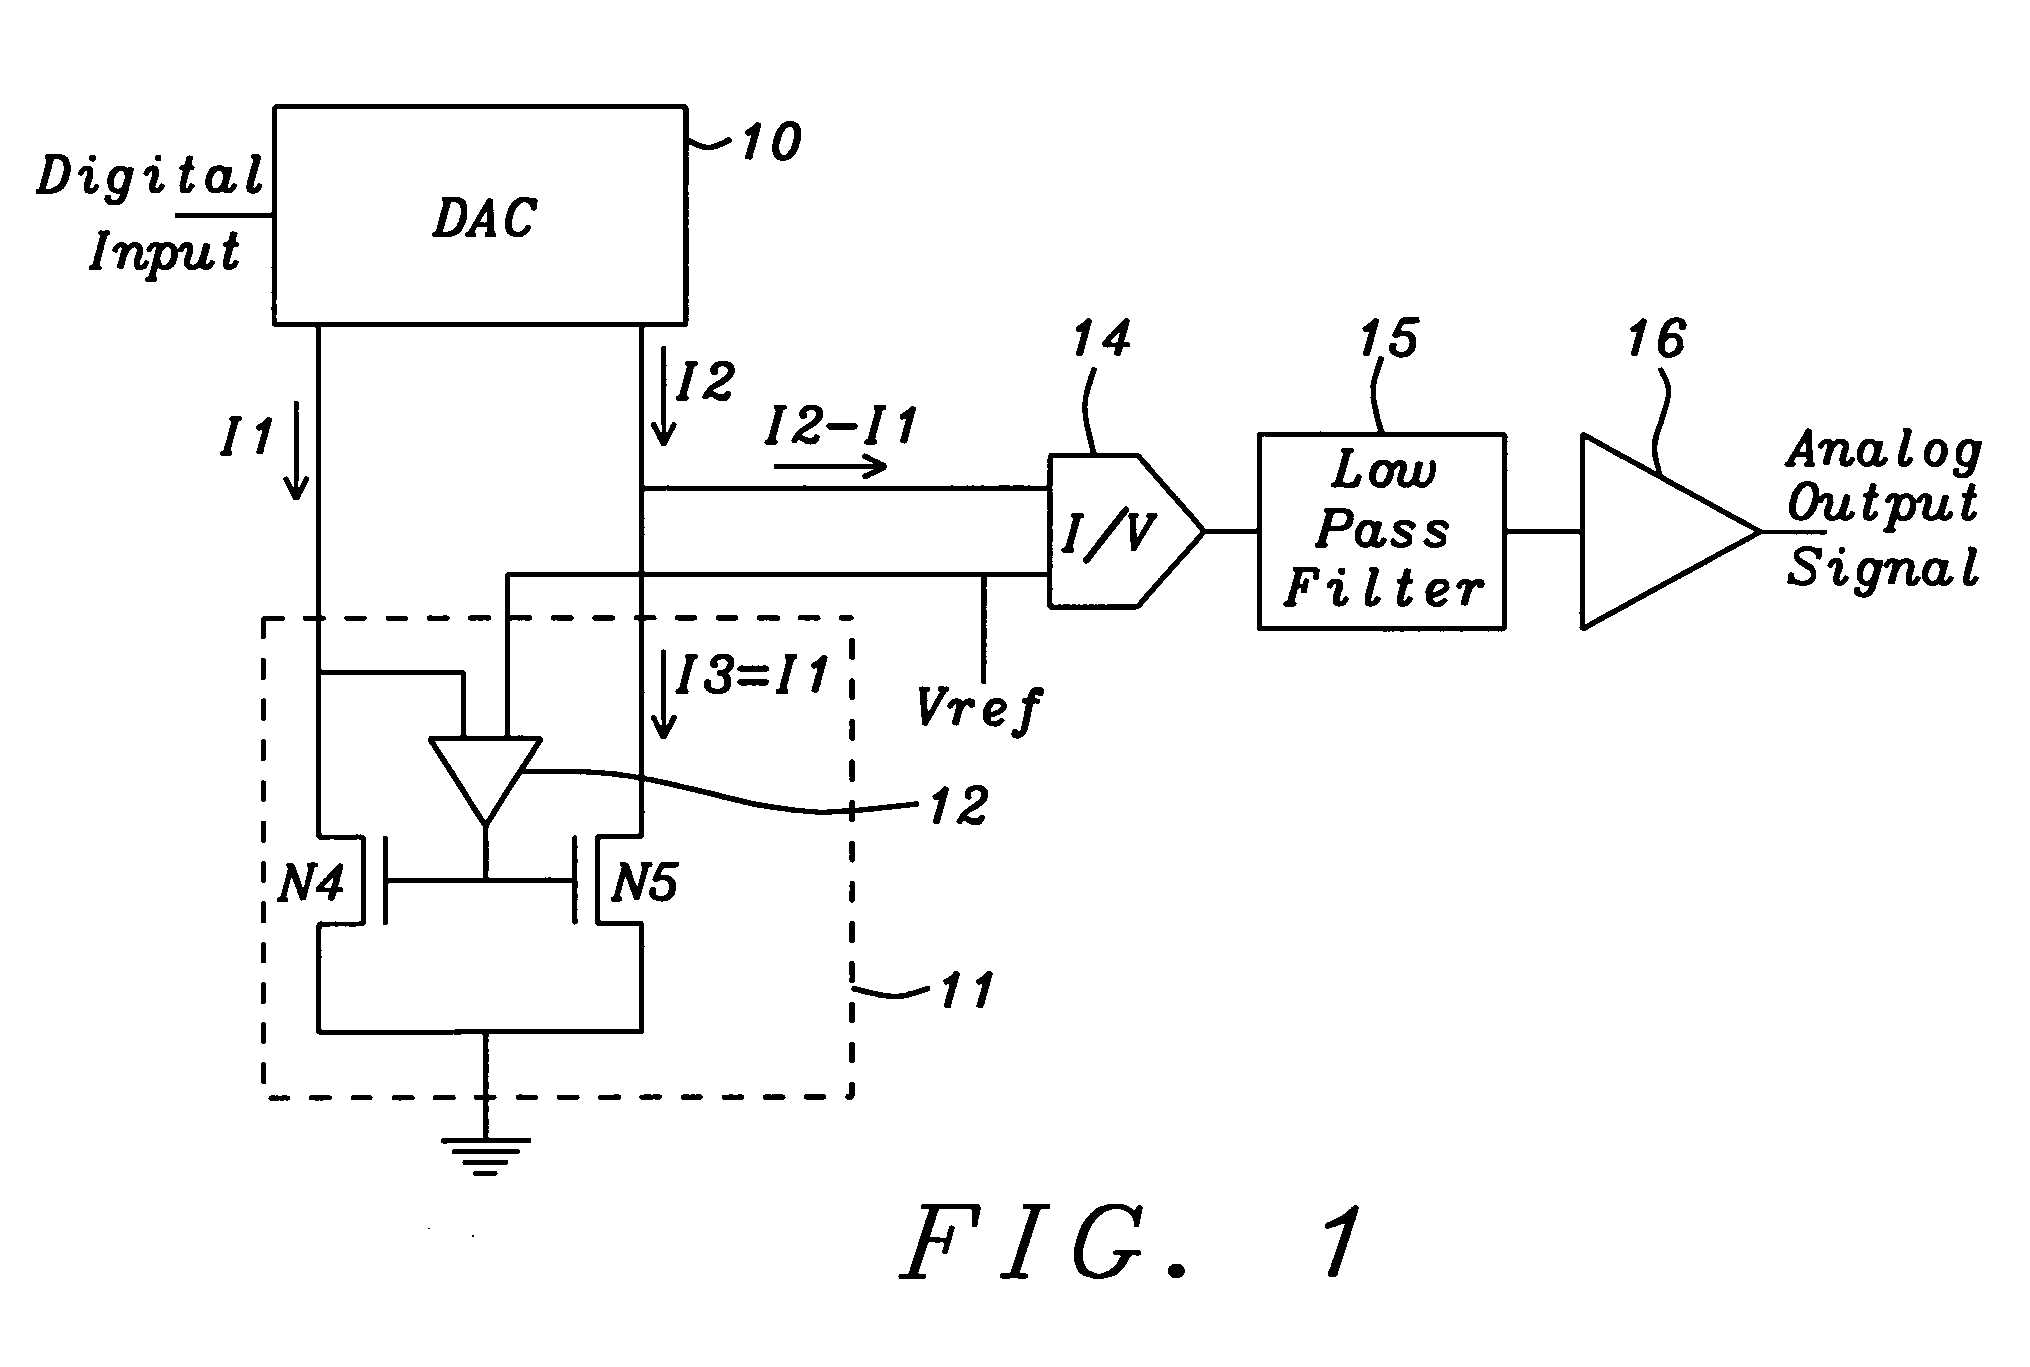 Method for implementation of a low noise, high accuracy current mirror for audio applications